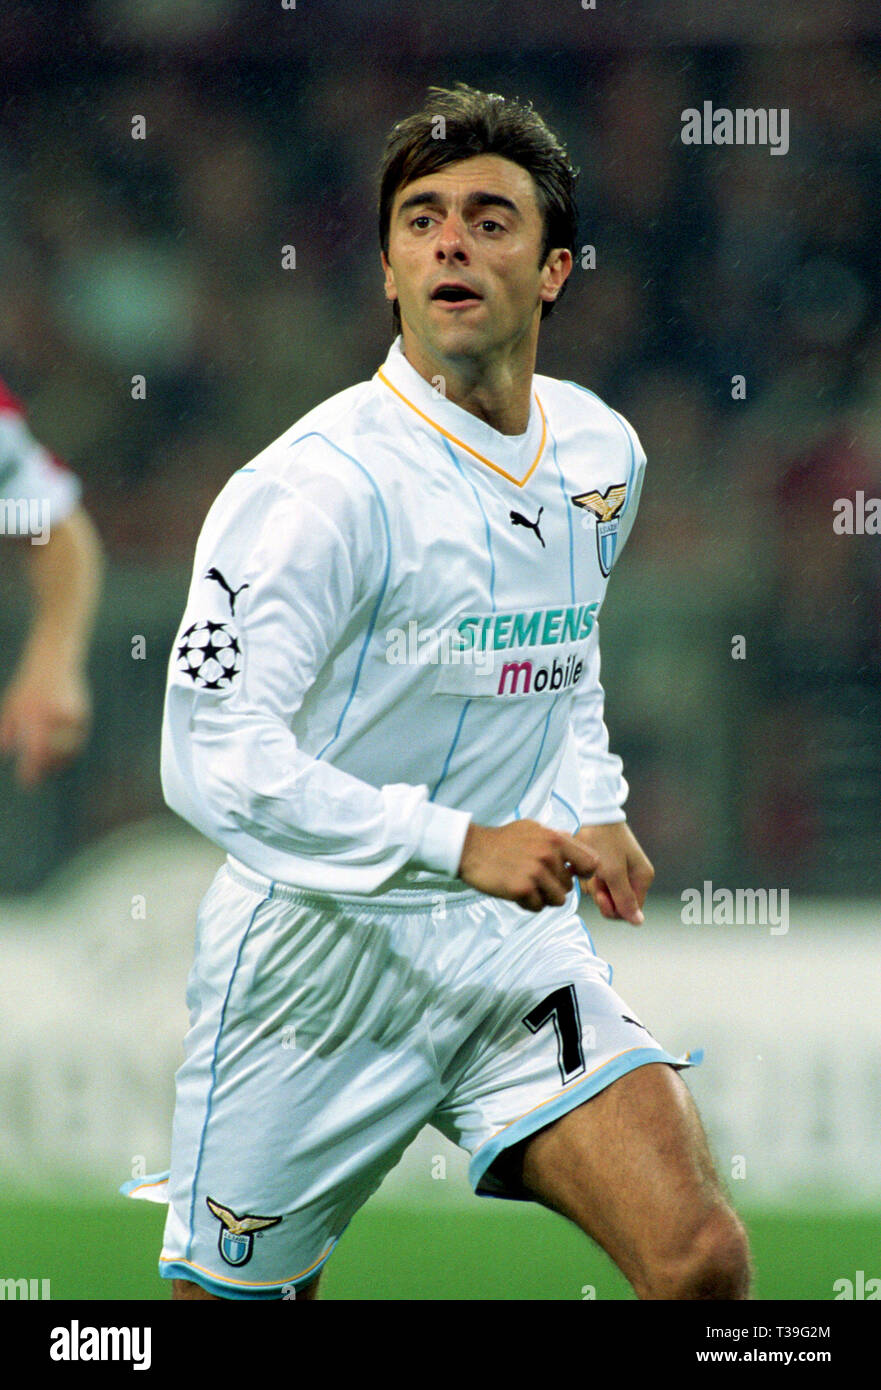 Philips Stadium Eindhoven, Netherlands 26.9.2001, UEFA Champions League  season 2001/02 first group stage, PSV Eindhoven (PSV, red)) vs Lazio Rom  (LZR,white) 1:0 --- Claudio LOPEZ (LZR Stock Photo - Alamy